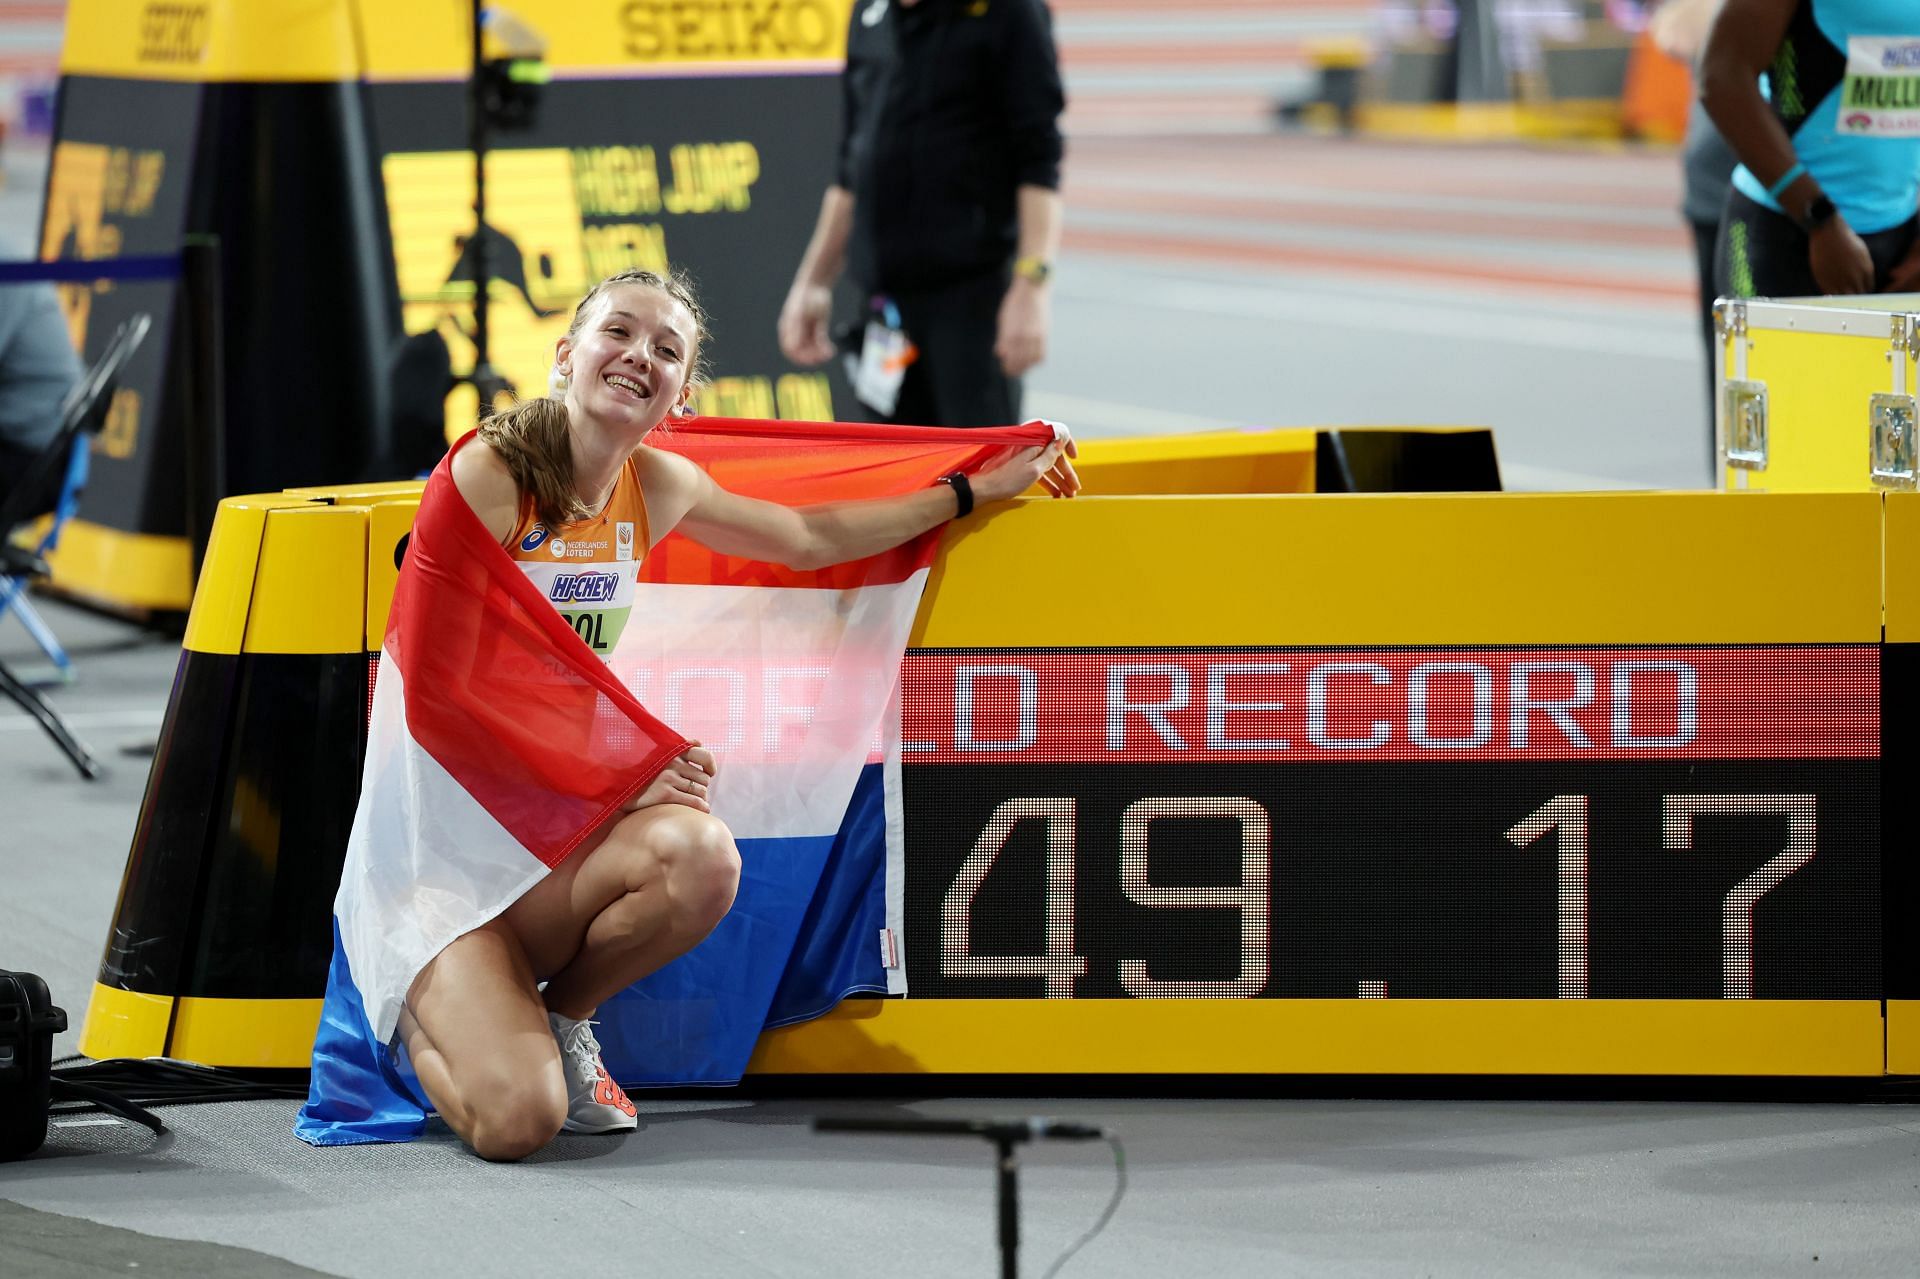 Femke Bol poses for a photo with the scoreboard after setting a new World Record in the 400 Metres at the 2024 World Athletics Indoor Championships in Glasgow, Scotland